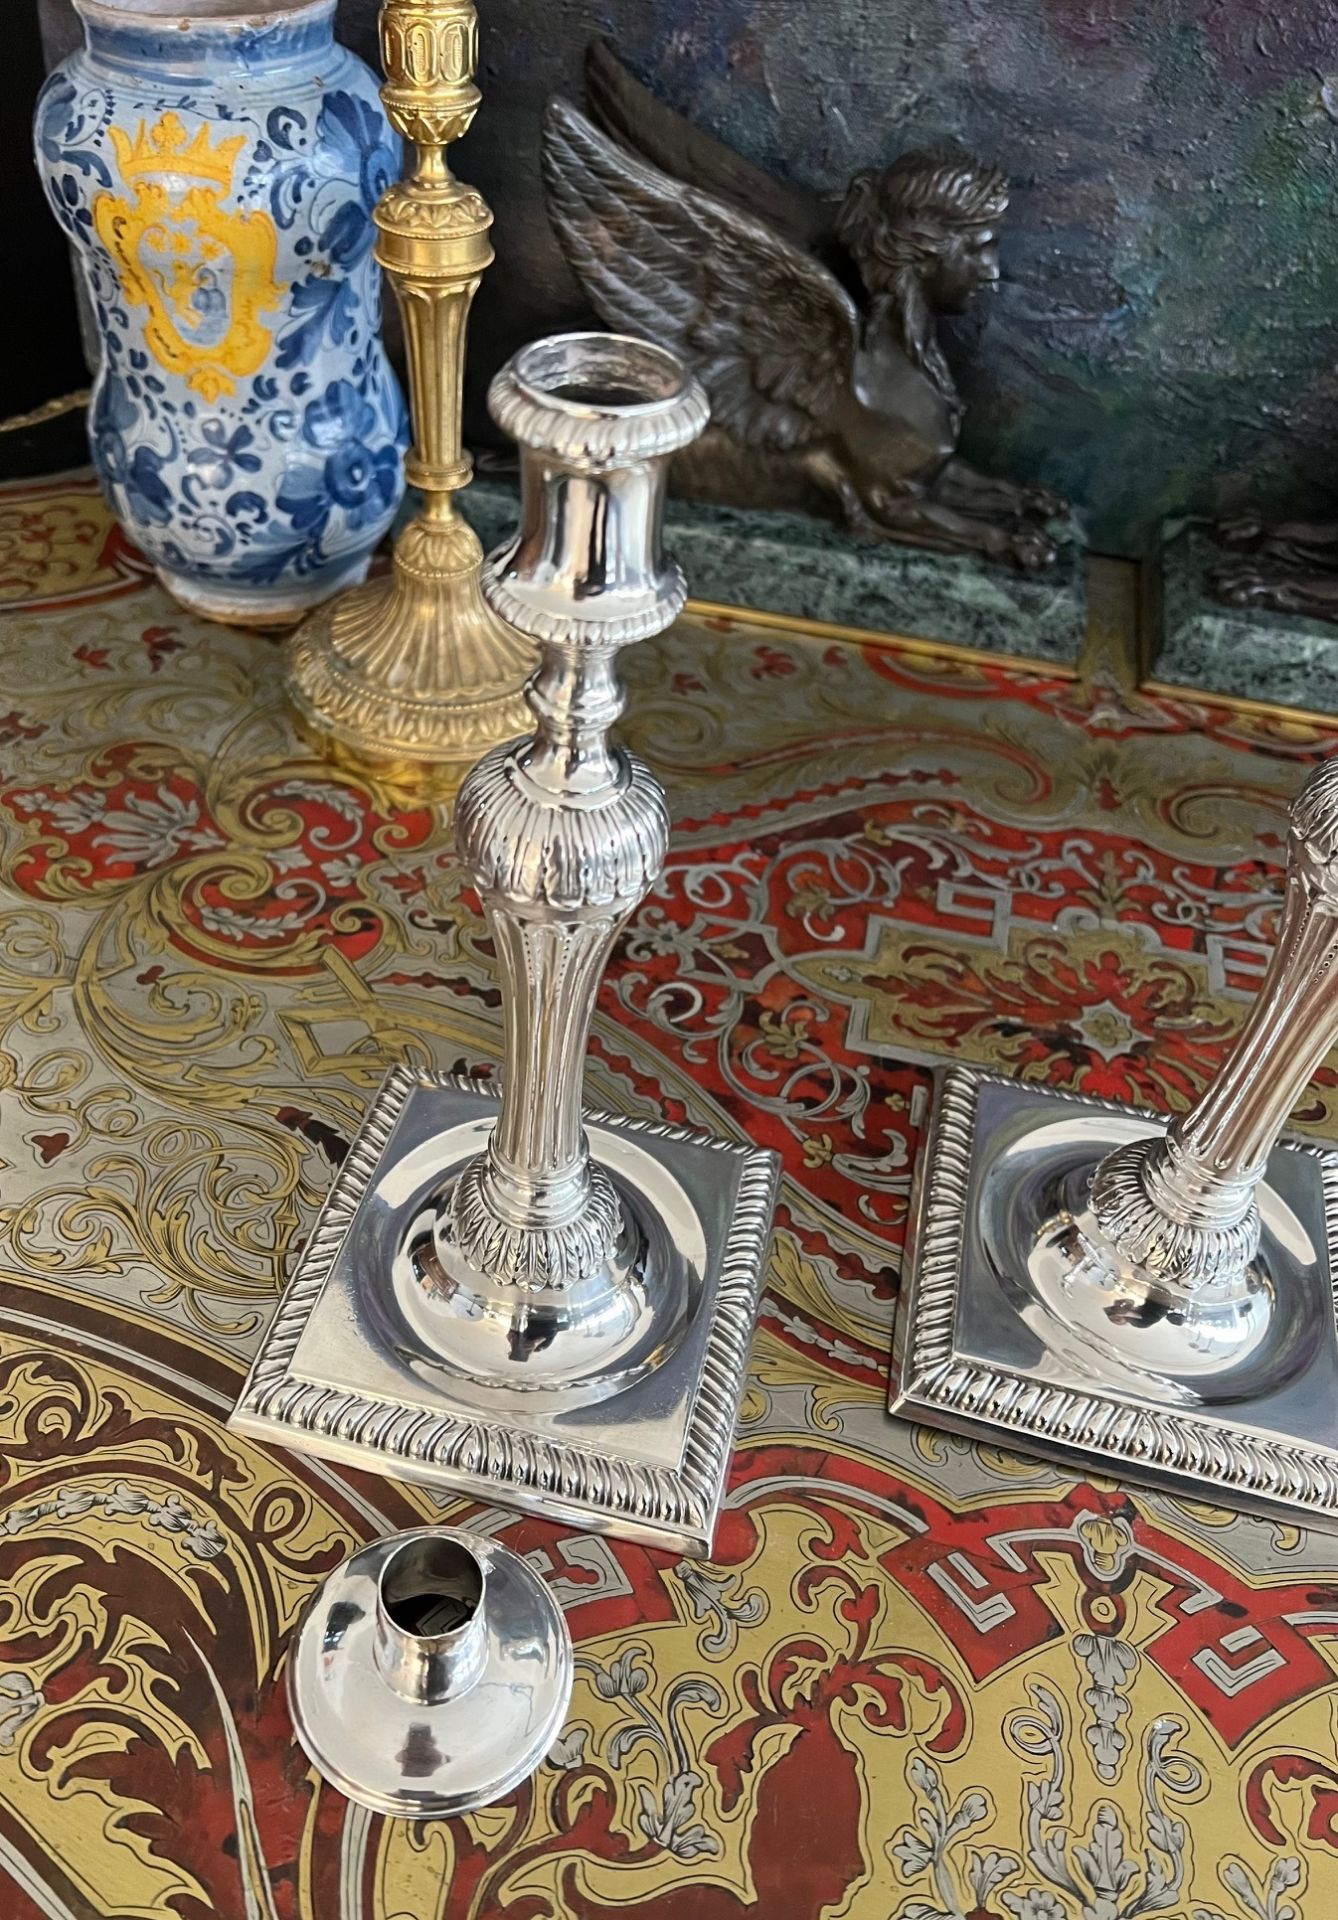 A FINE PAIR OF 18TH CENTURY STERLING SILVER CANDLESTICKS, LONDON, 1772 JOHN ARNELL - Image 8 of 9